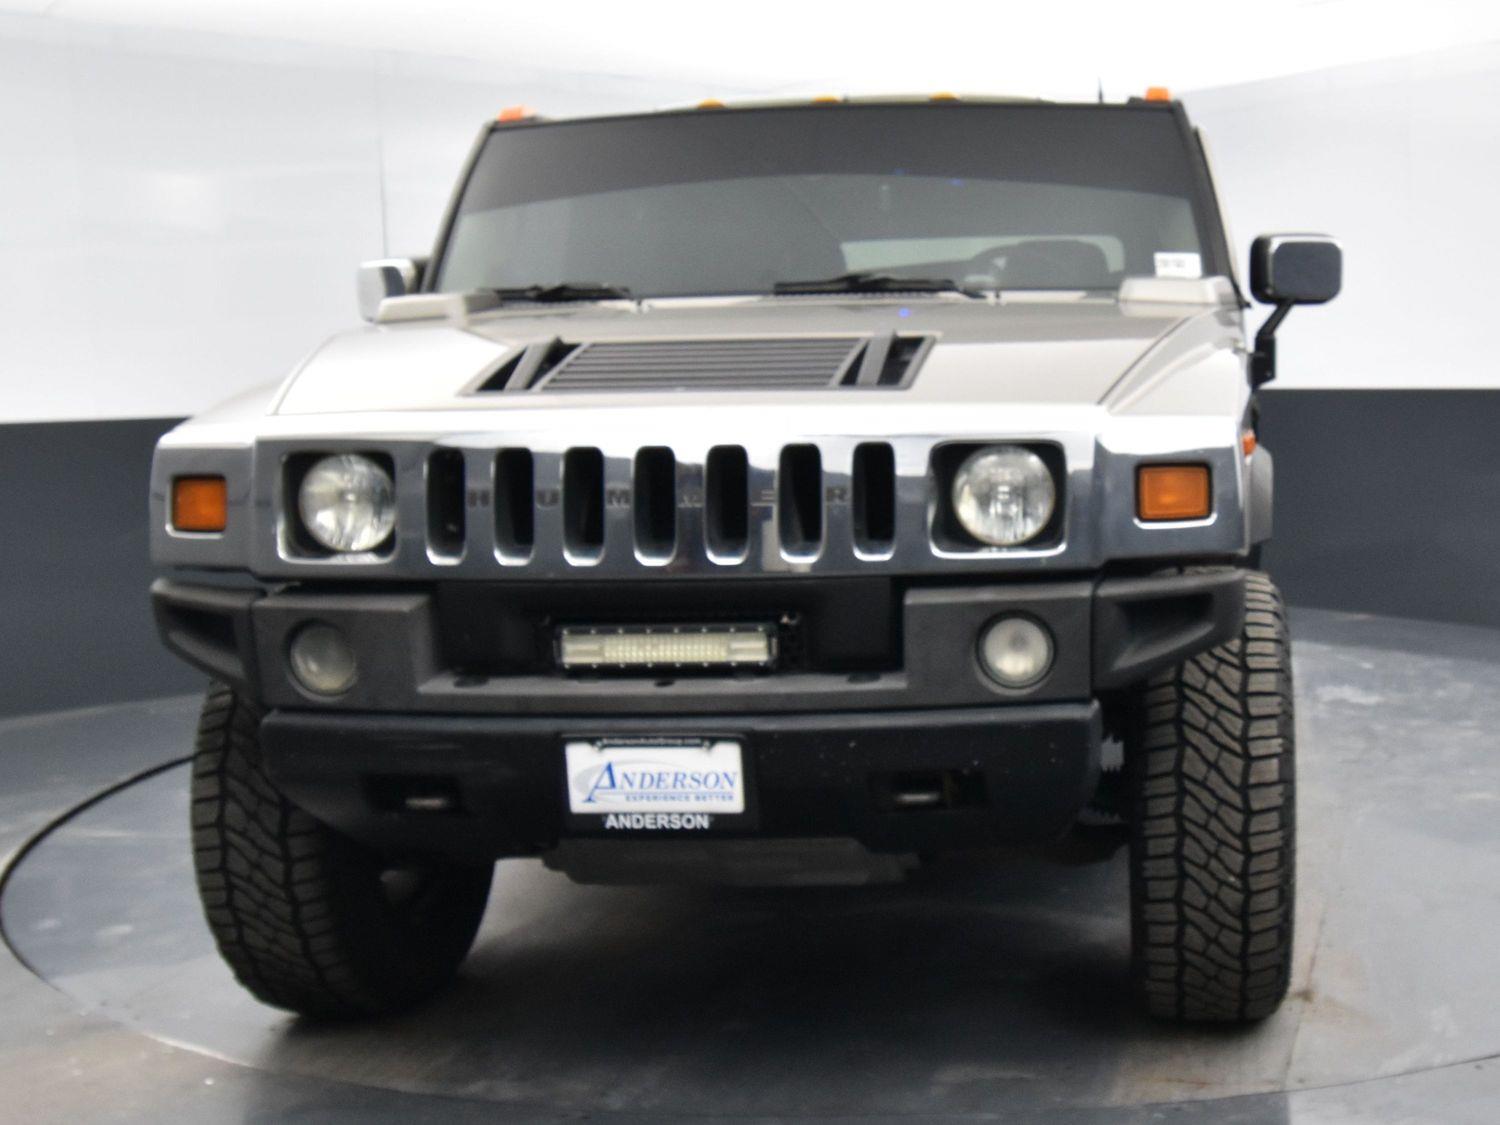 Used 2004 HUMMER H2  4 Door Wagon for sale in Grand Island NE